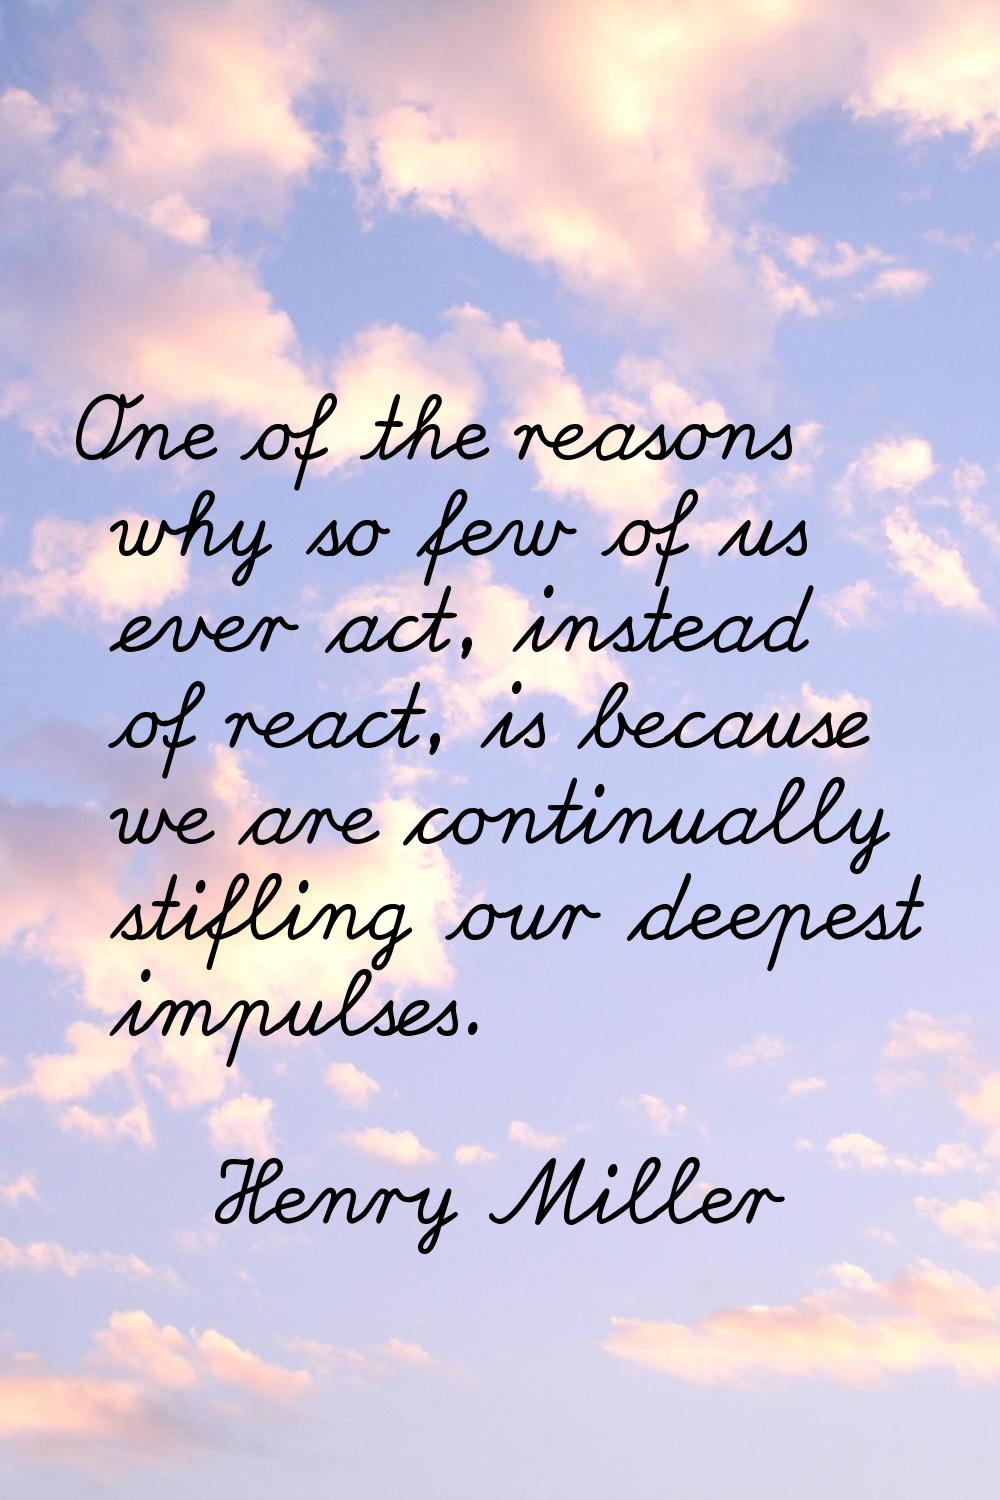 One of the reasons why so few of us ever act, instead of react, is because we are continually stifl